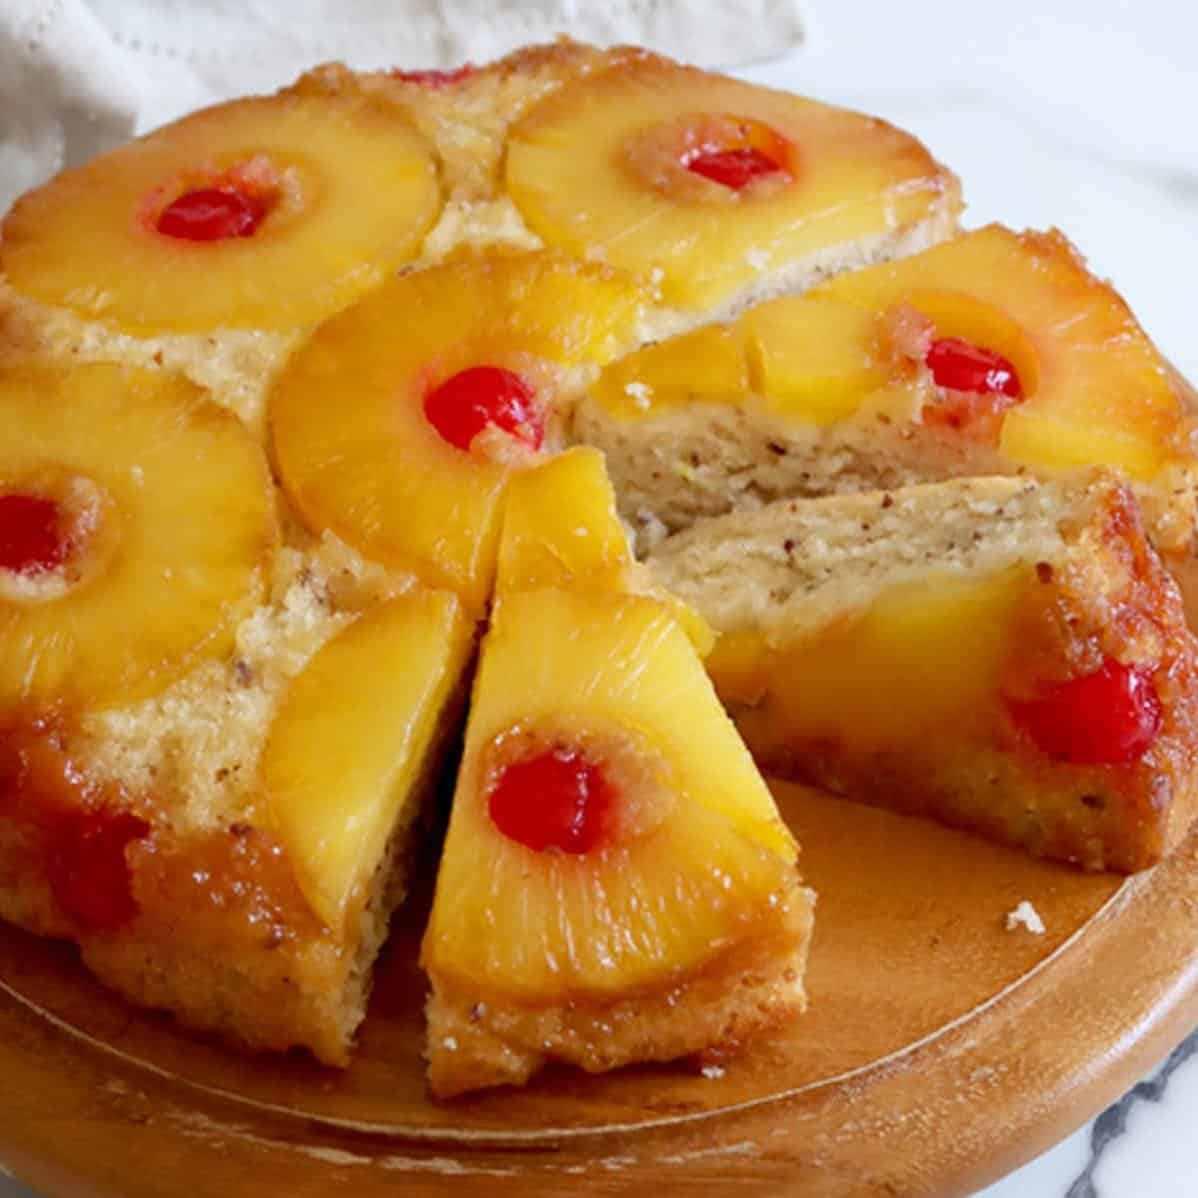  Get ready for a slice of heaven with each bite of this Vegan Pineapple-Upside Down Cake.